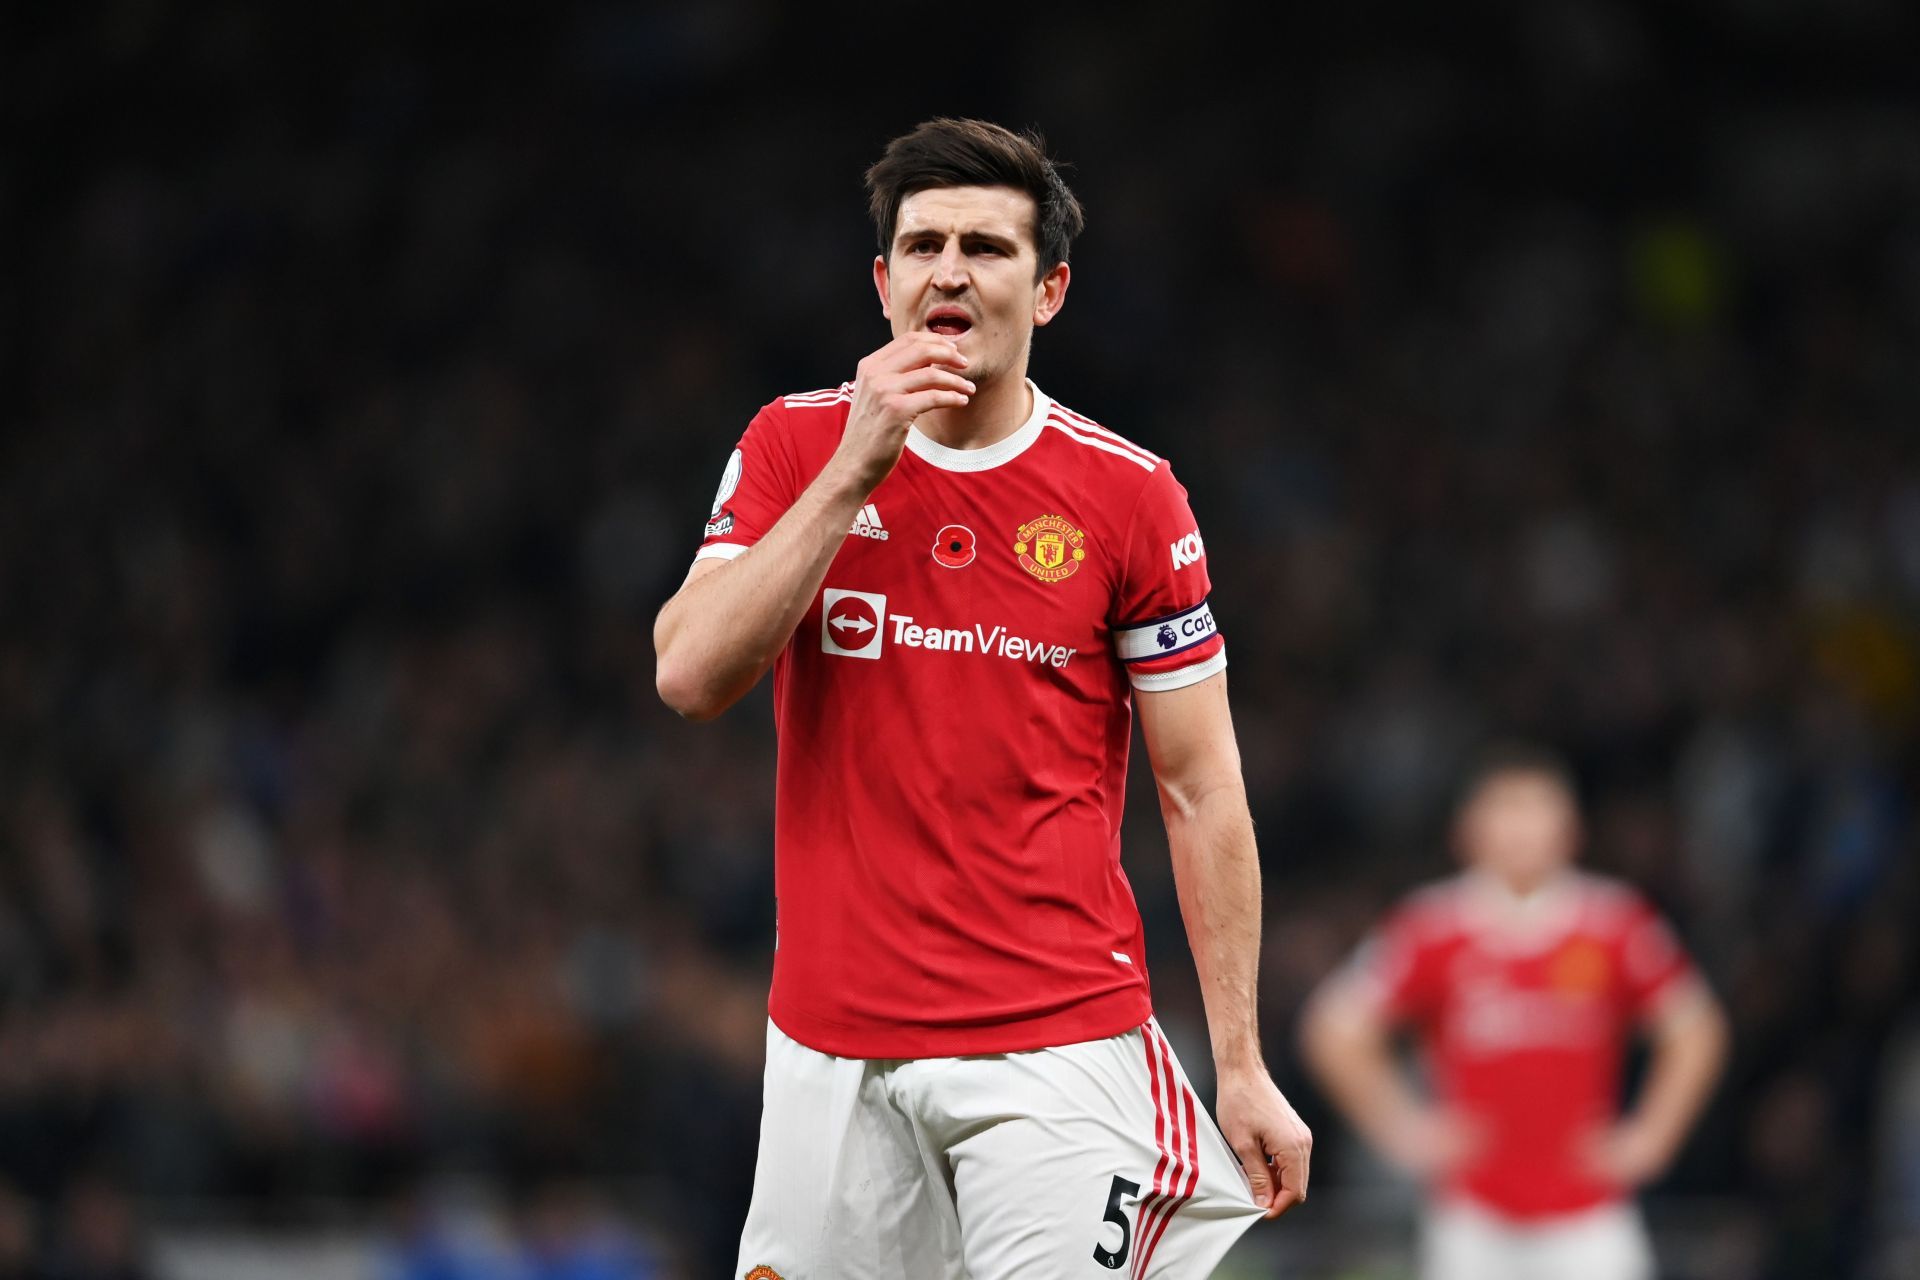 Manchester United defender Harry Maguire. (Photo by Mike Hewitt/Getty Images)